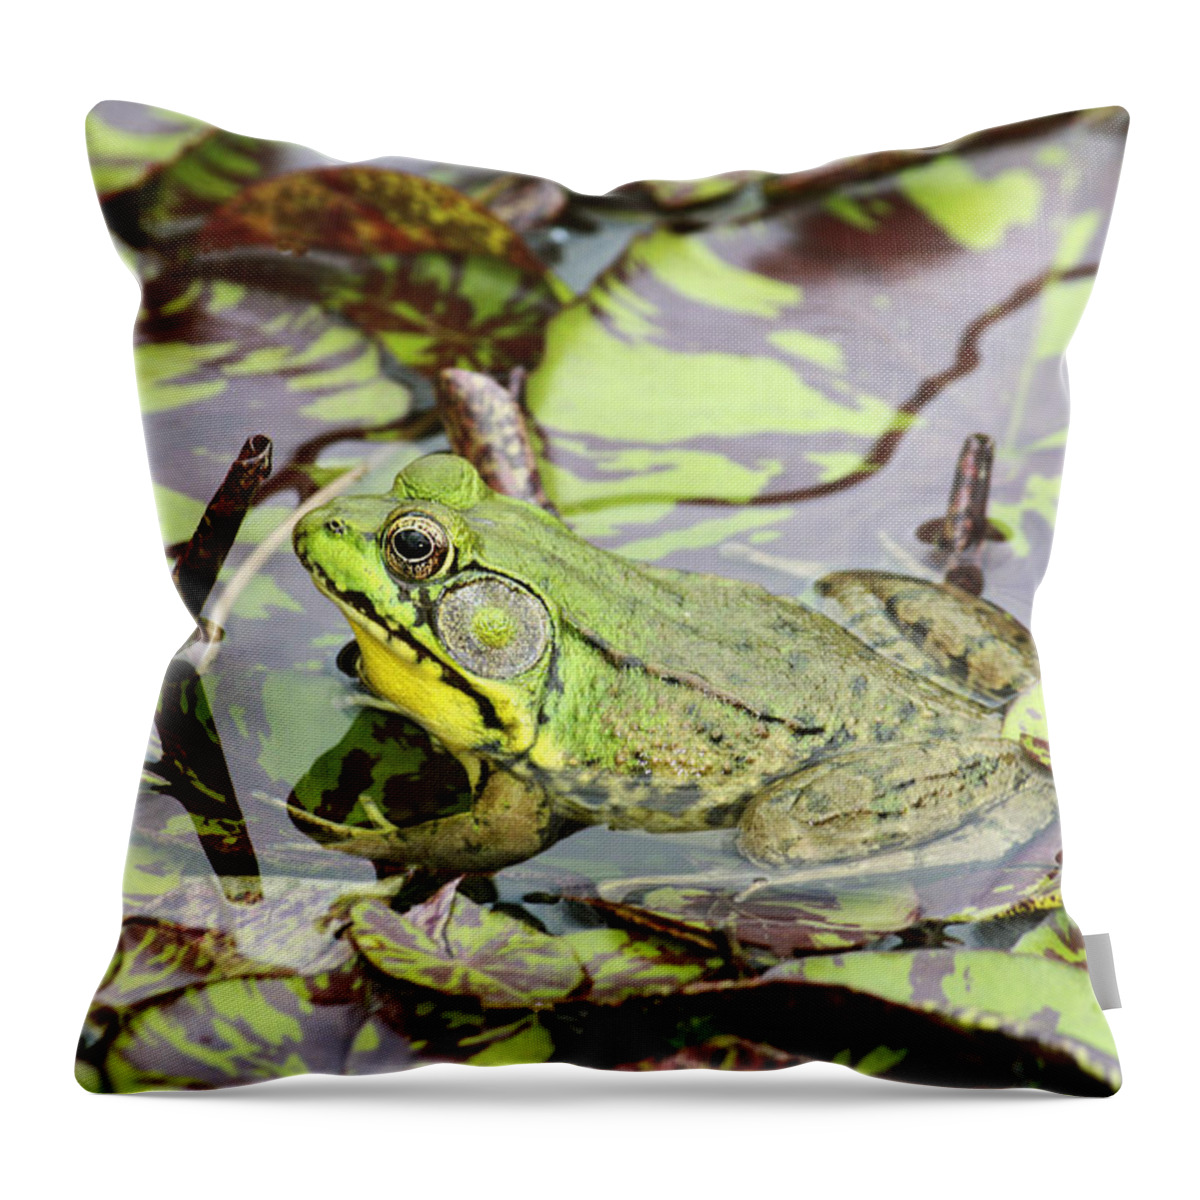 Northern Green Frog Throw Pillow featuring the photograph Can you see me? by Marina Kojukhova